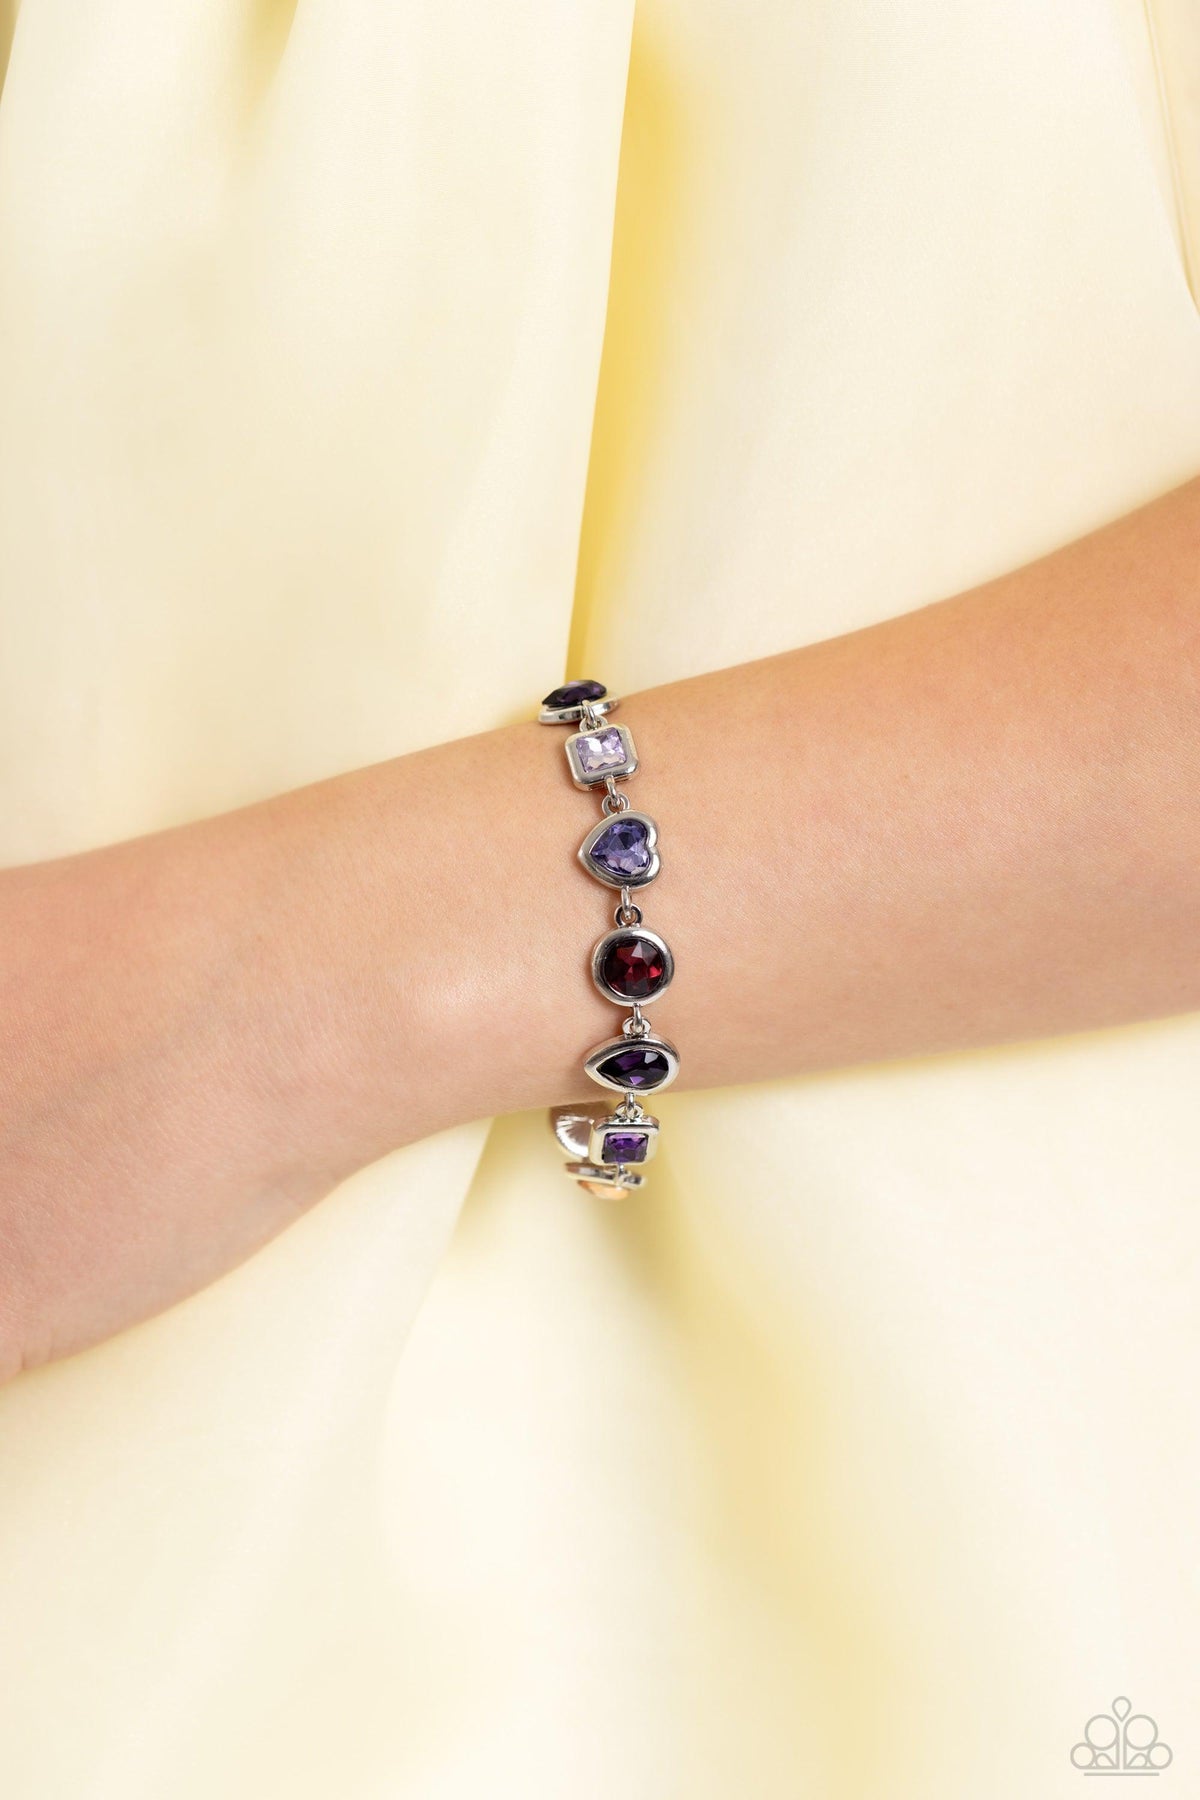 Actively Abstract Purple Rhinestone Bracelet - Paparazzi Accessories-on model - CarasShop.com - $5 Jewelry by Cara Jewels